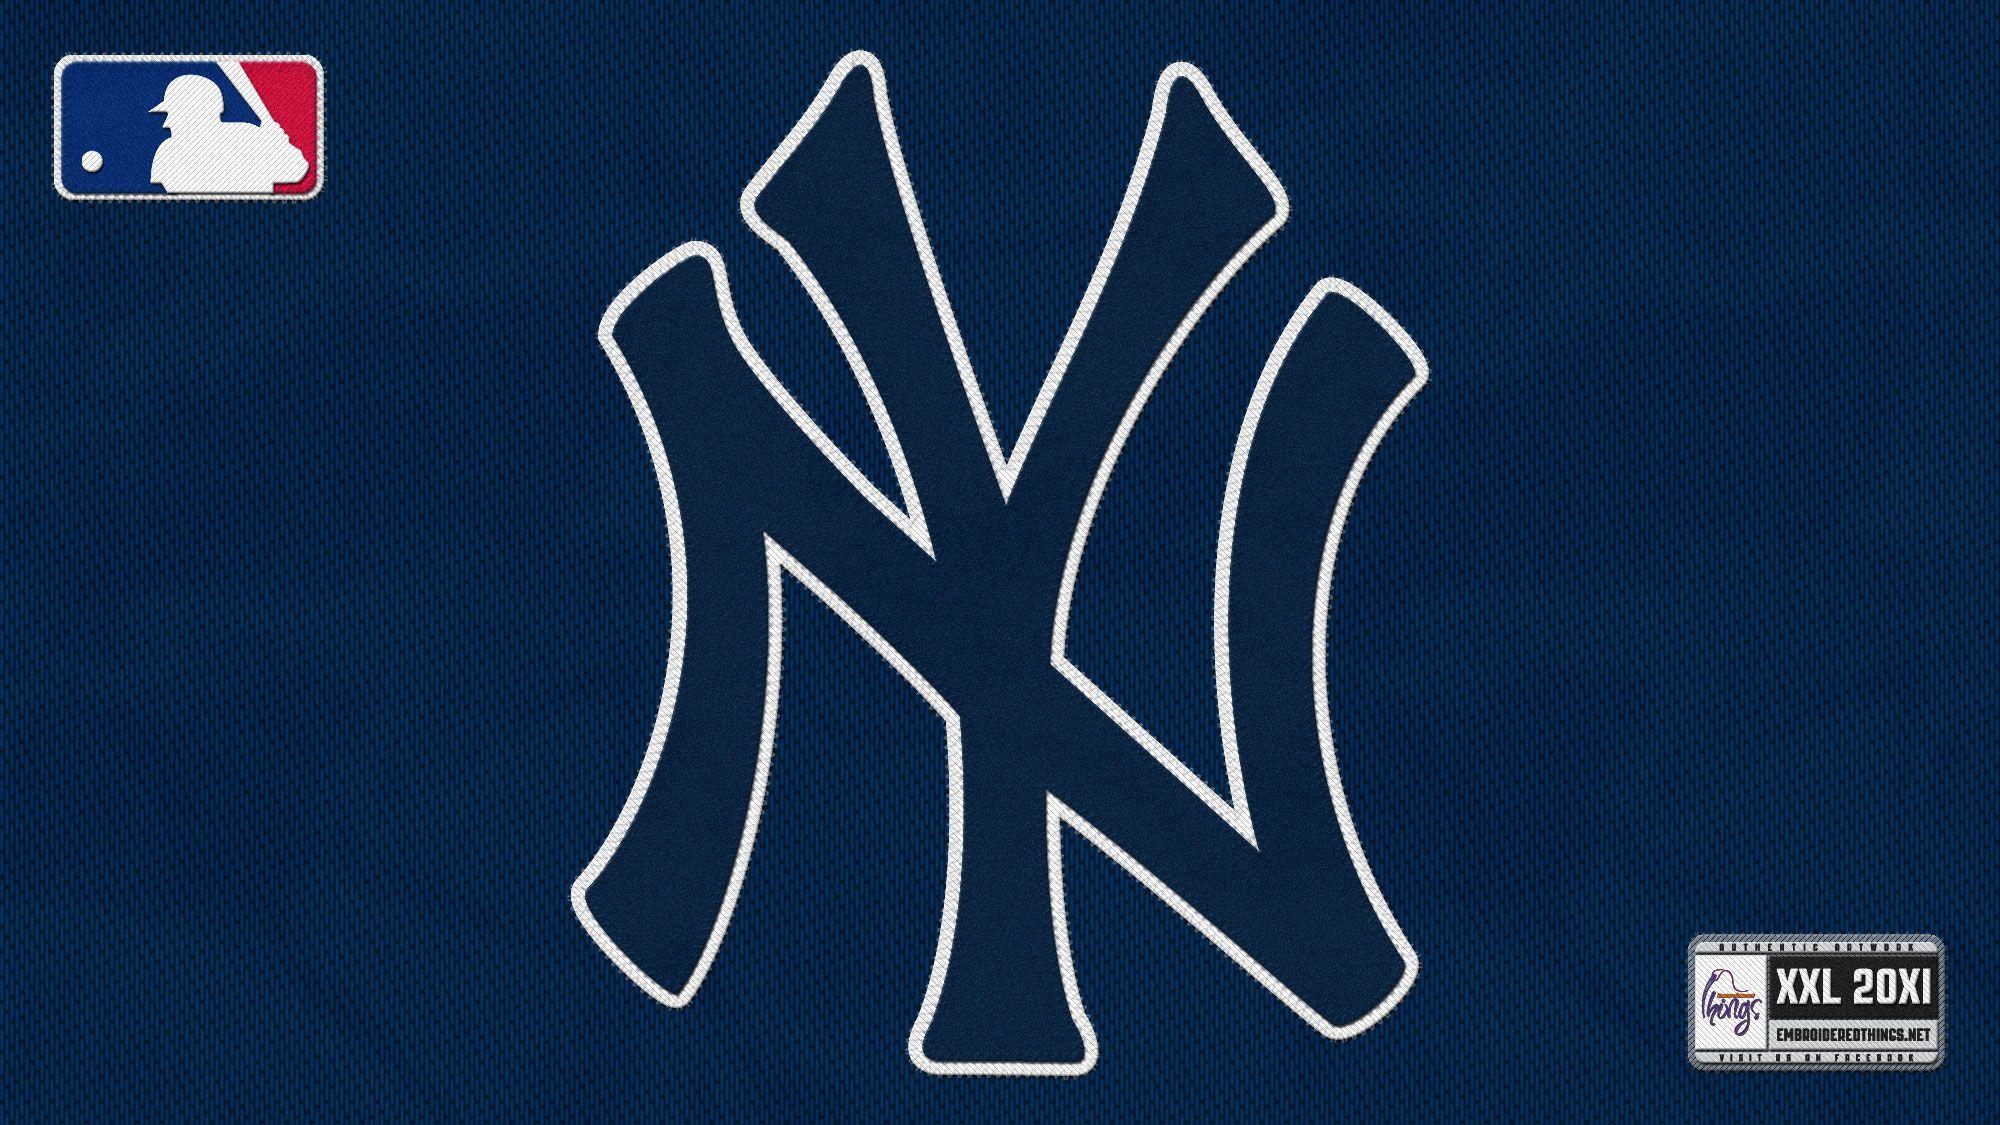 New York Yankees Cool Wallpaper. NY. Wallpaper and Website